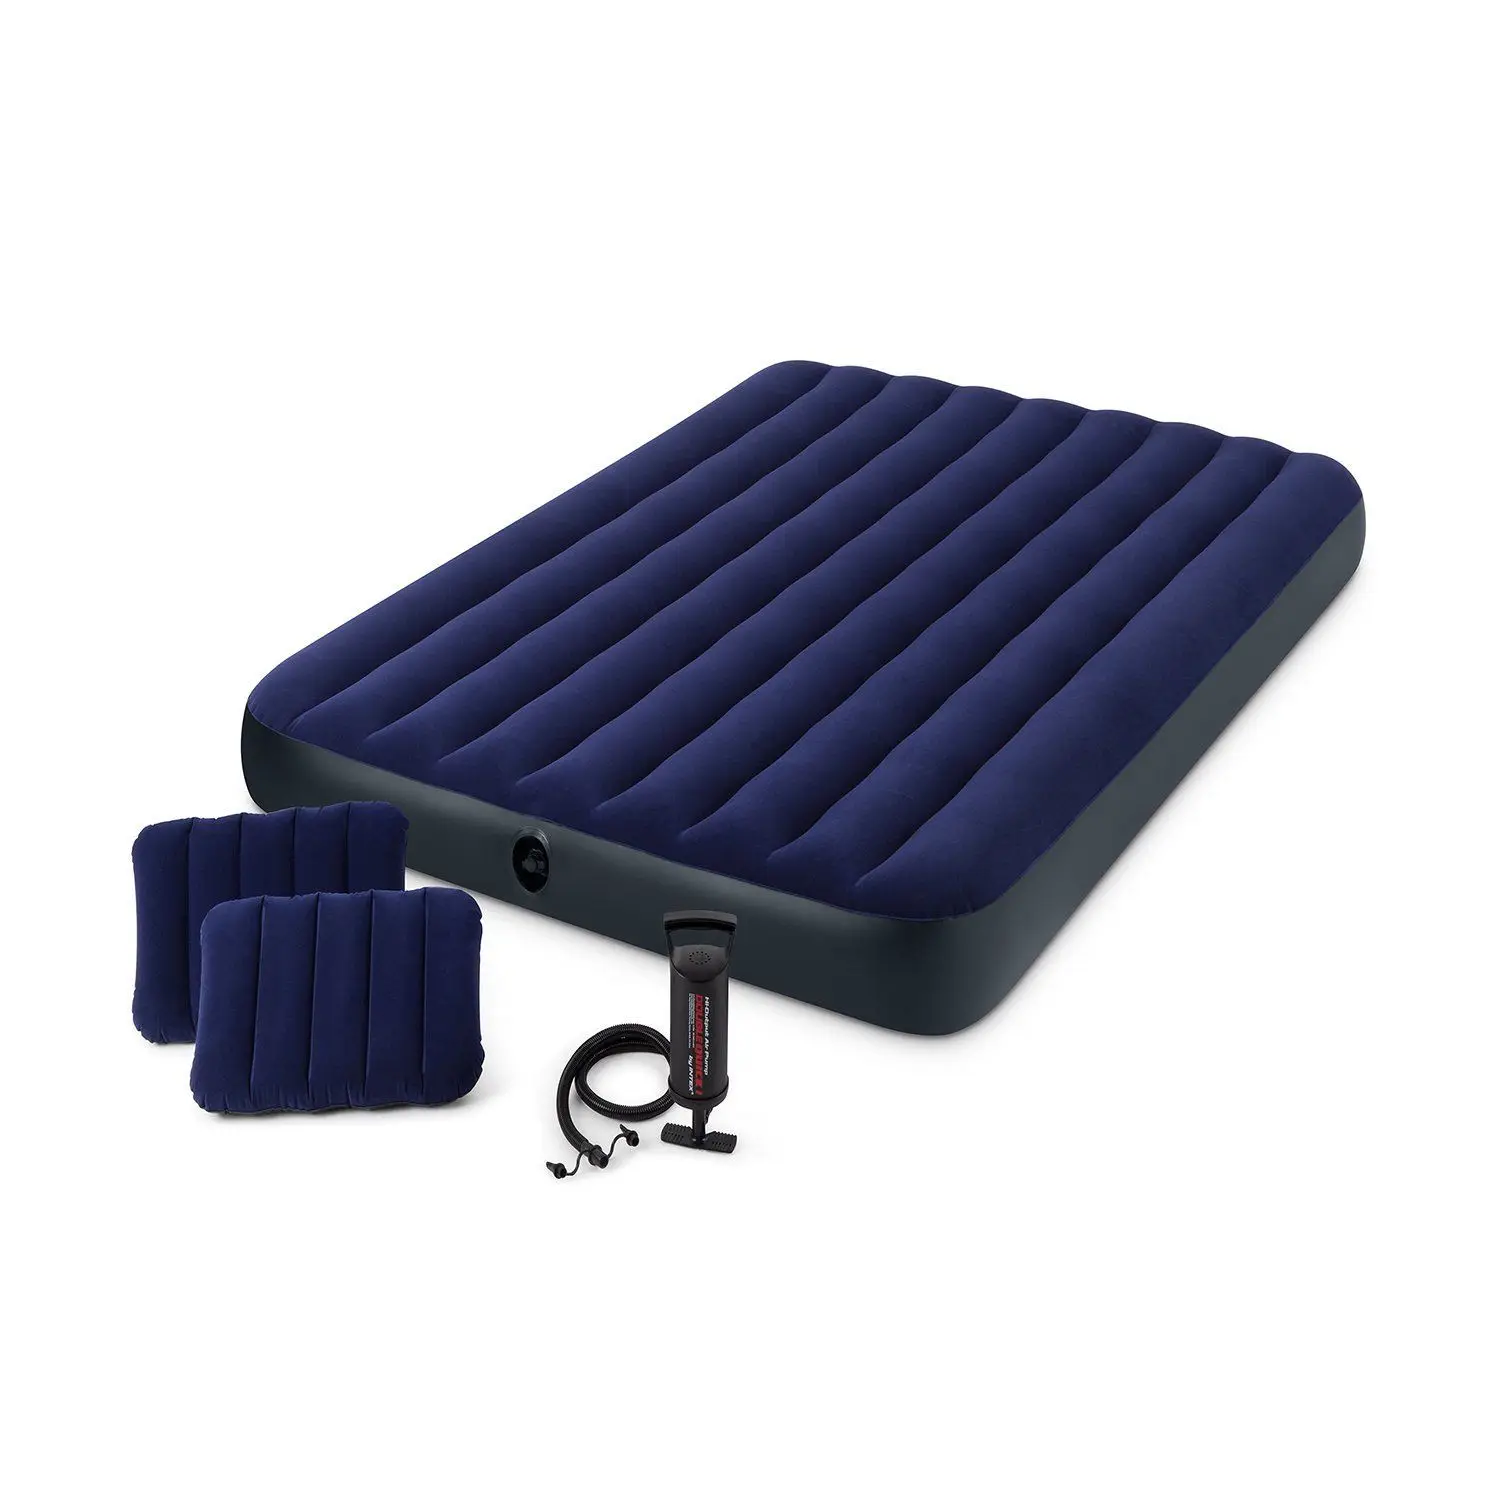 Intex Classic Downy Airbed (64765)